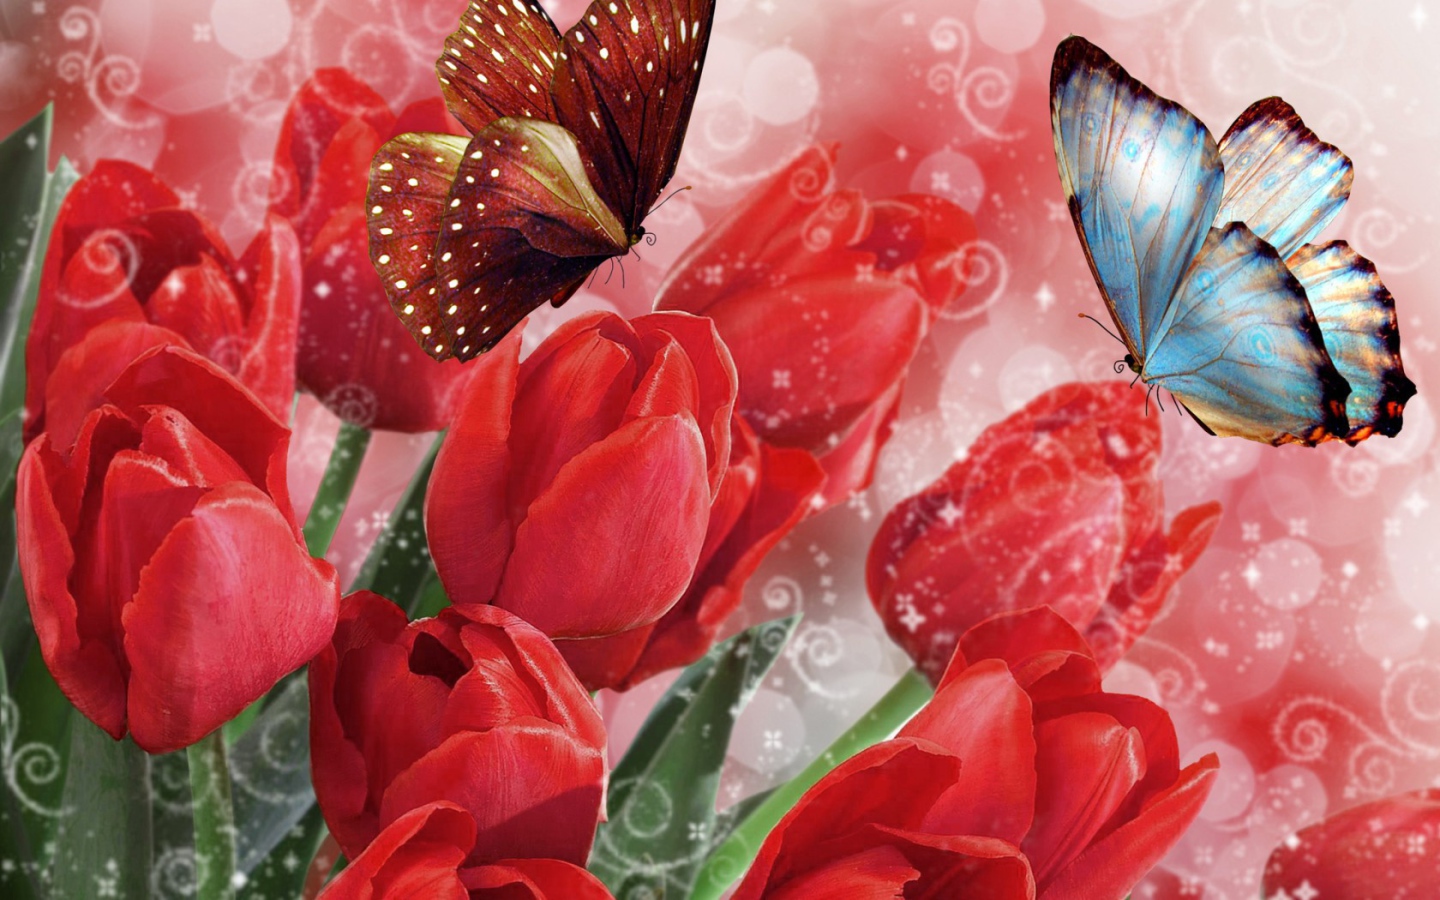 Butterflies on tulips on March 8